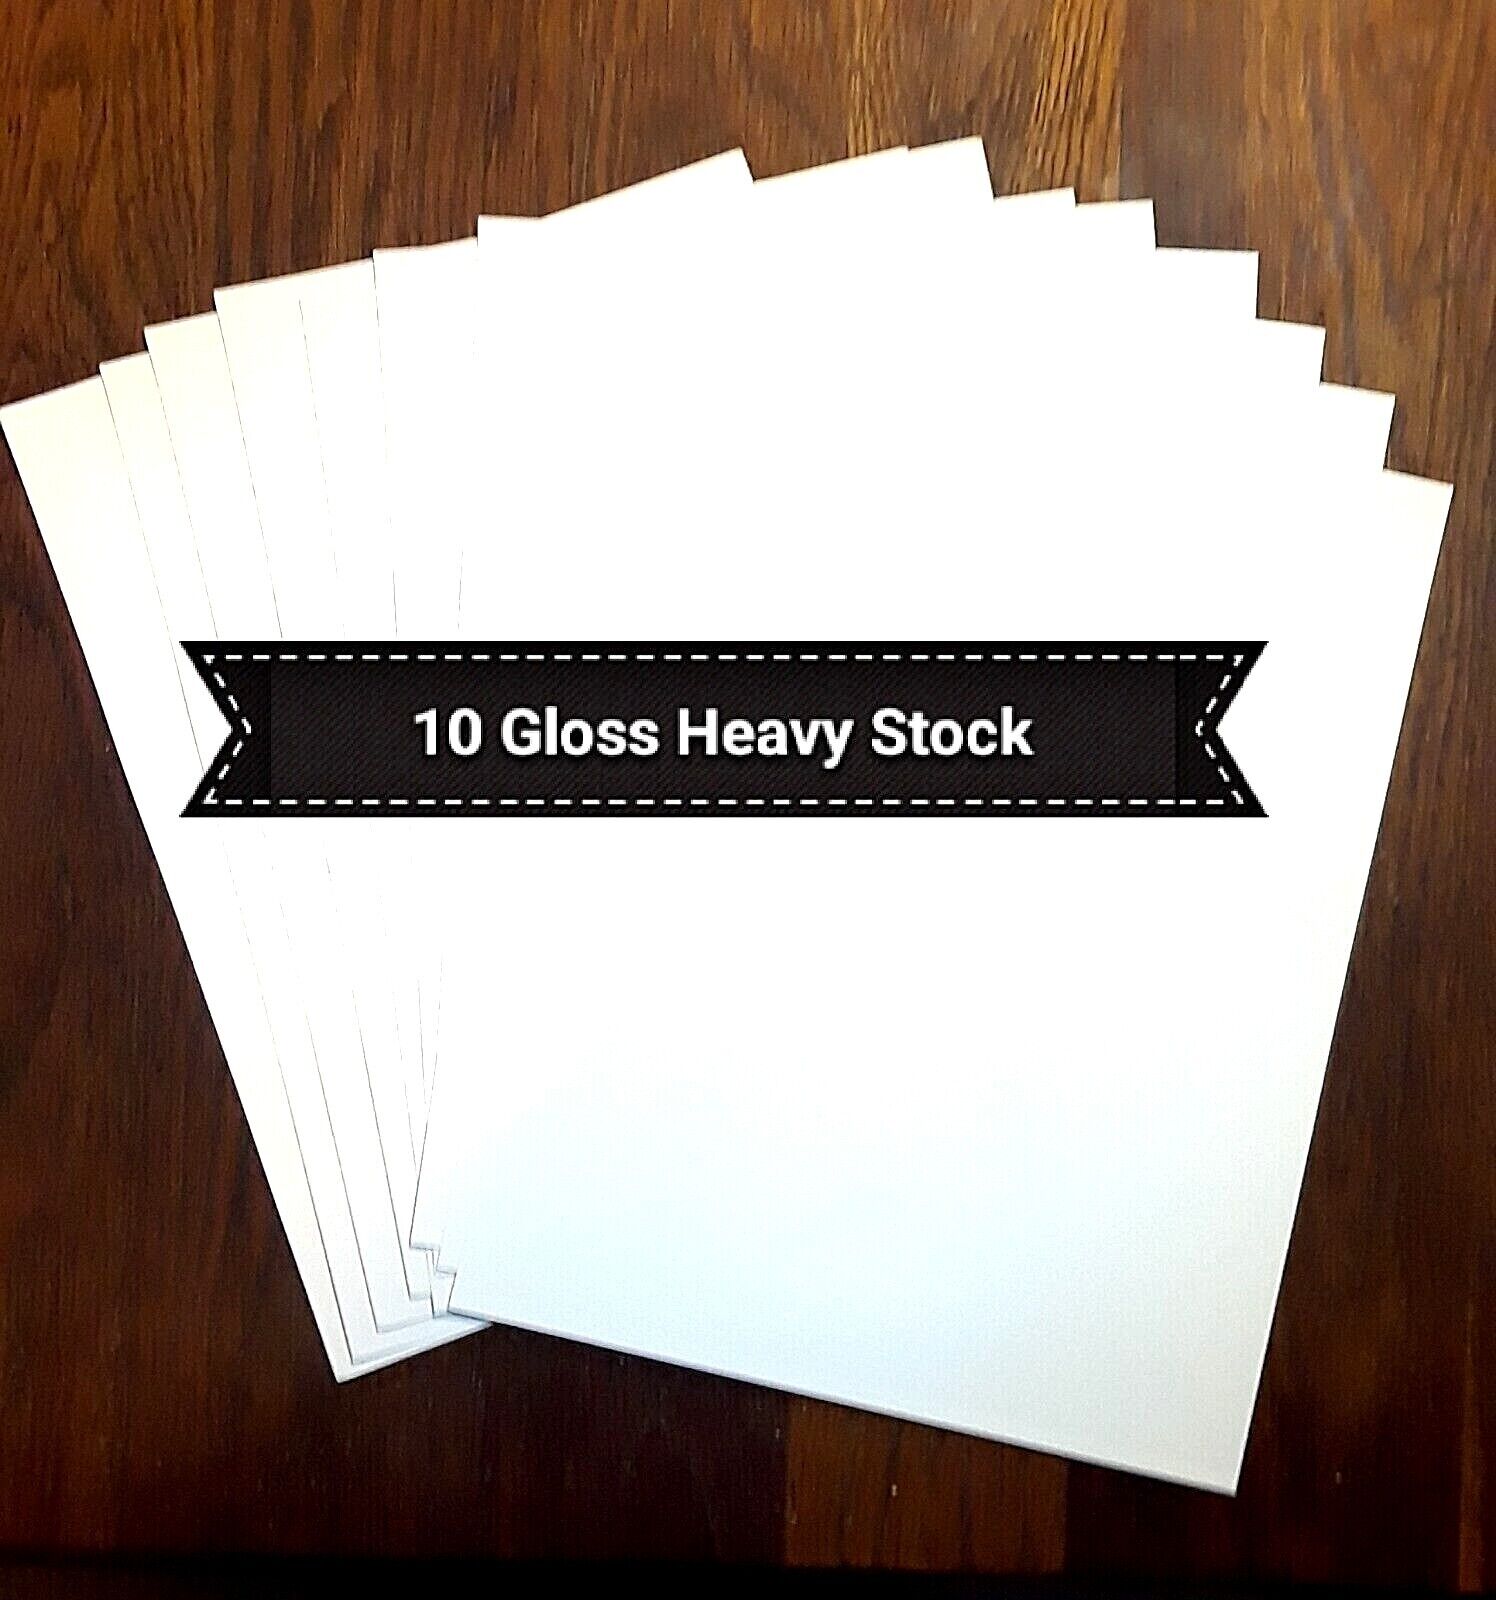 HP PHOTO Paper 8.5 x 11 GLOSSY Laser HEAVY STOCK White ( 10 - 20 Sheets )